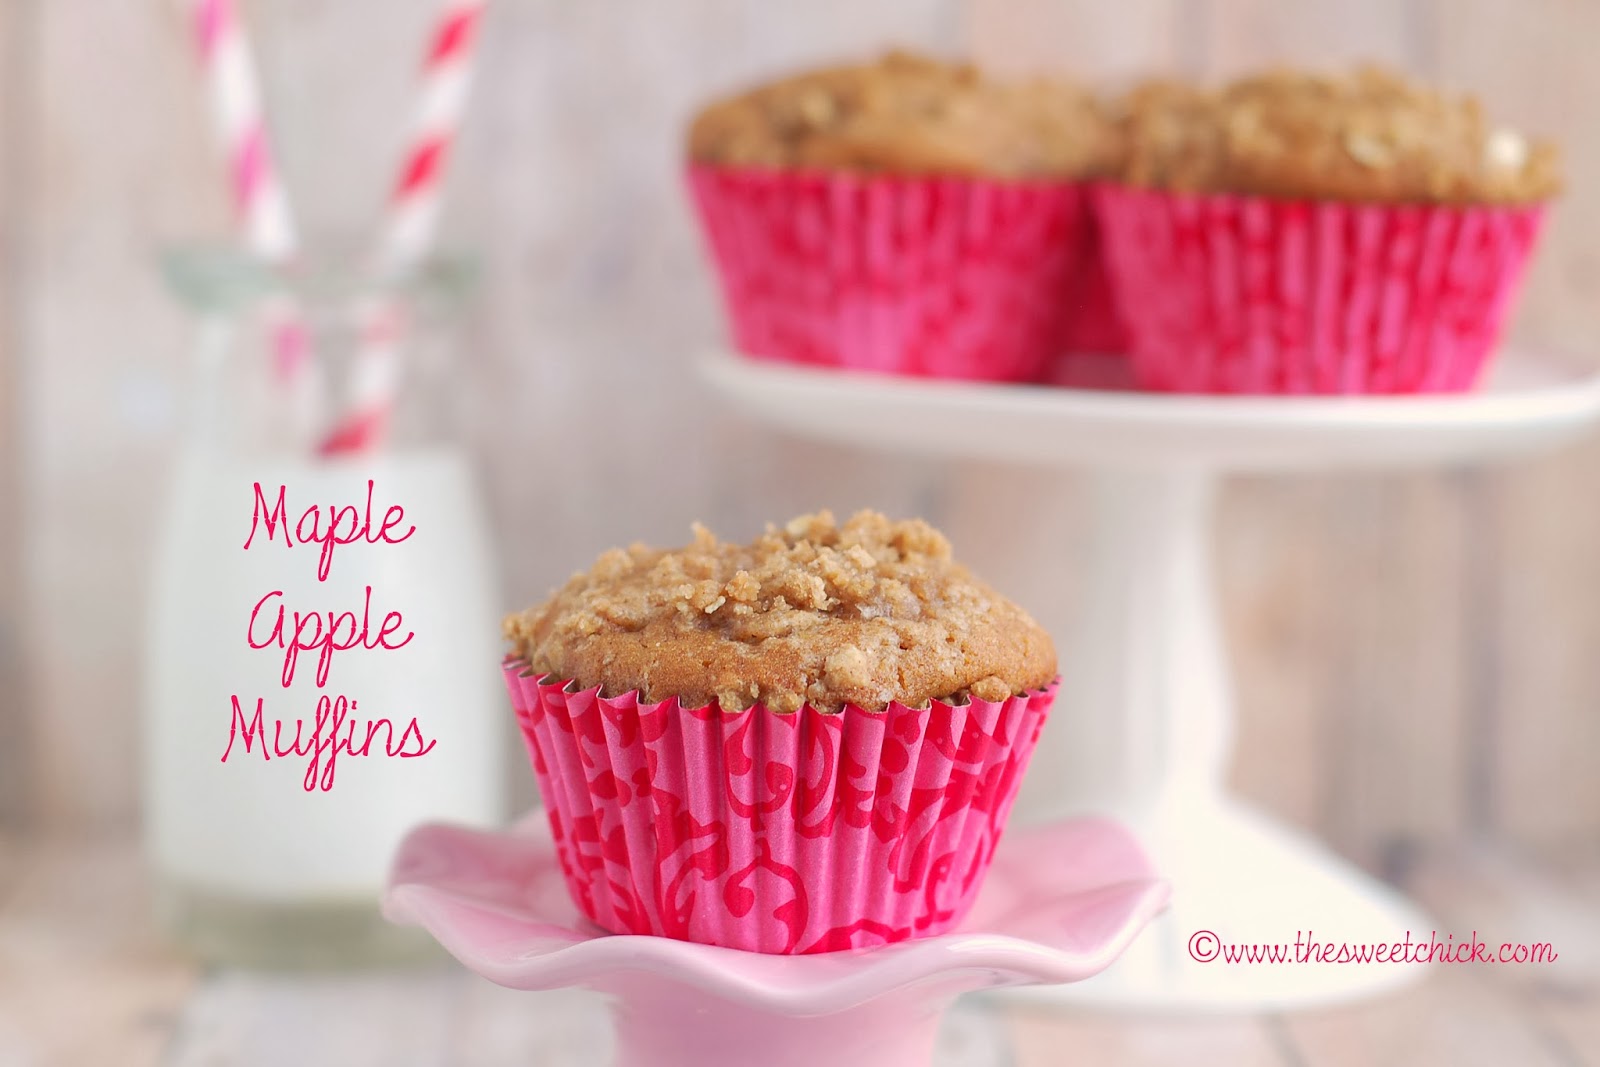 Maple Apple Muffins by The Sweet Chick